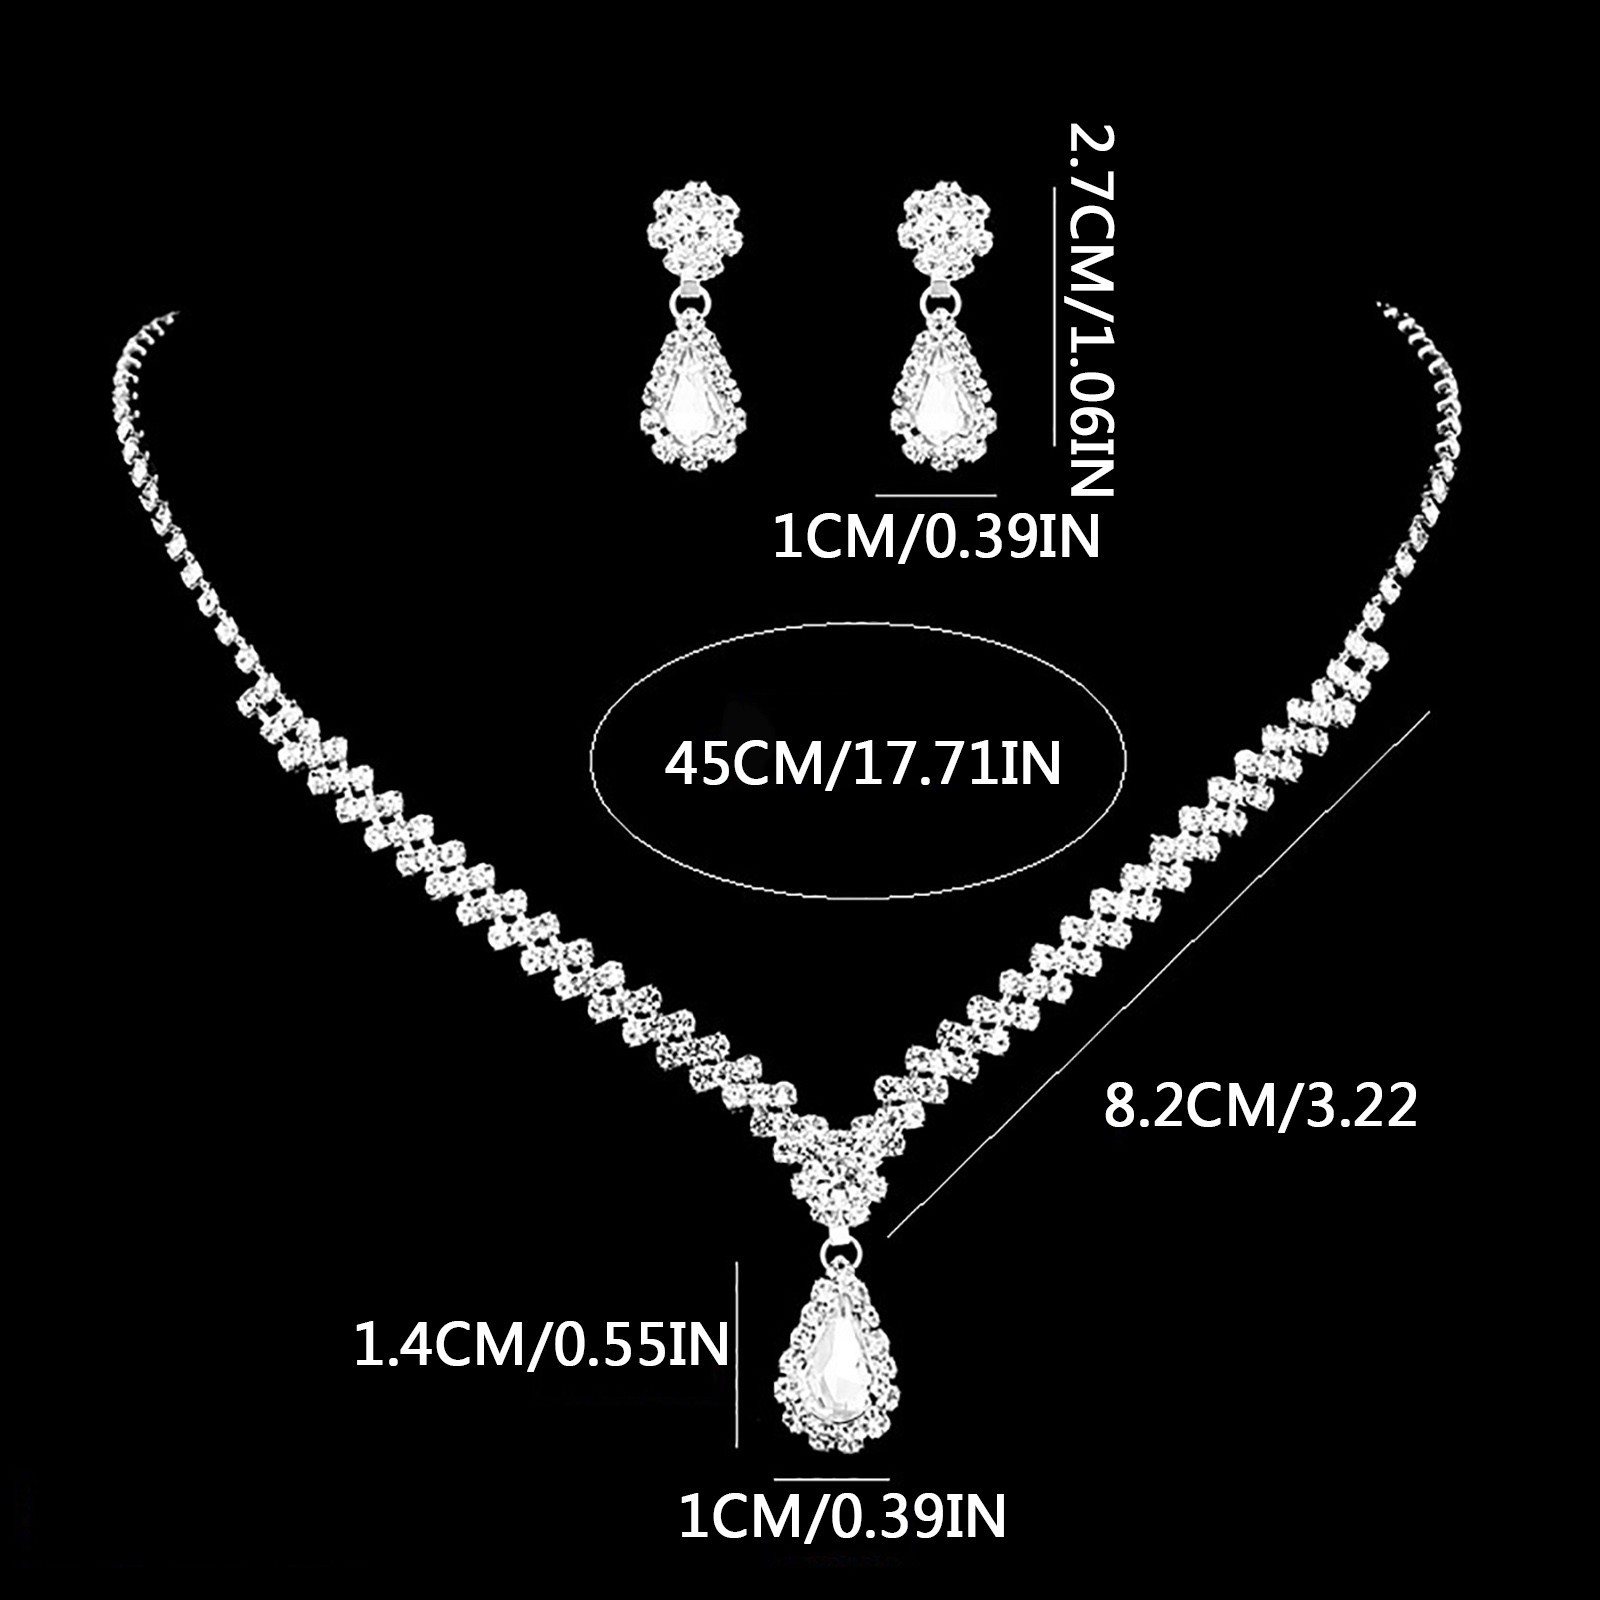 TIHLMK Deals Clearance Initial Necklaces for Women Exquisite Rhinestone Chain Necklace Set Diamond Necklace and Earrings Two-piece Wedding Bridal Jewelry Set - image 3 of 5